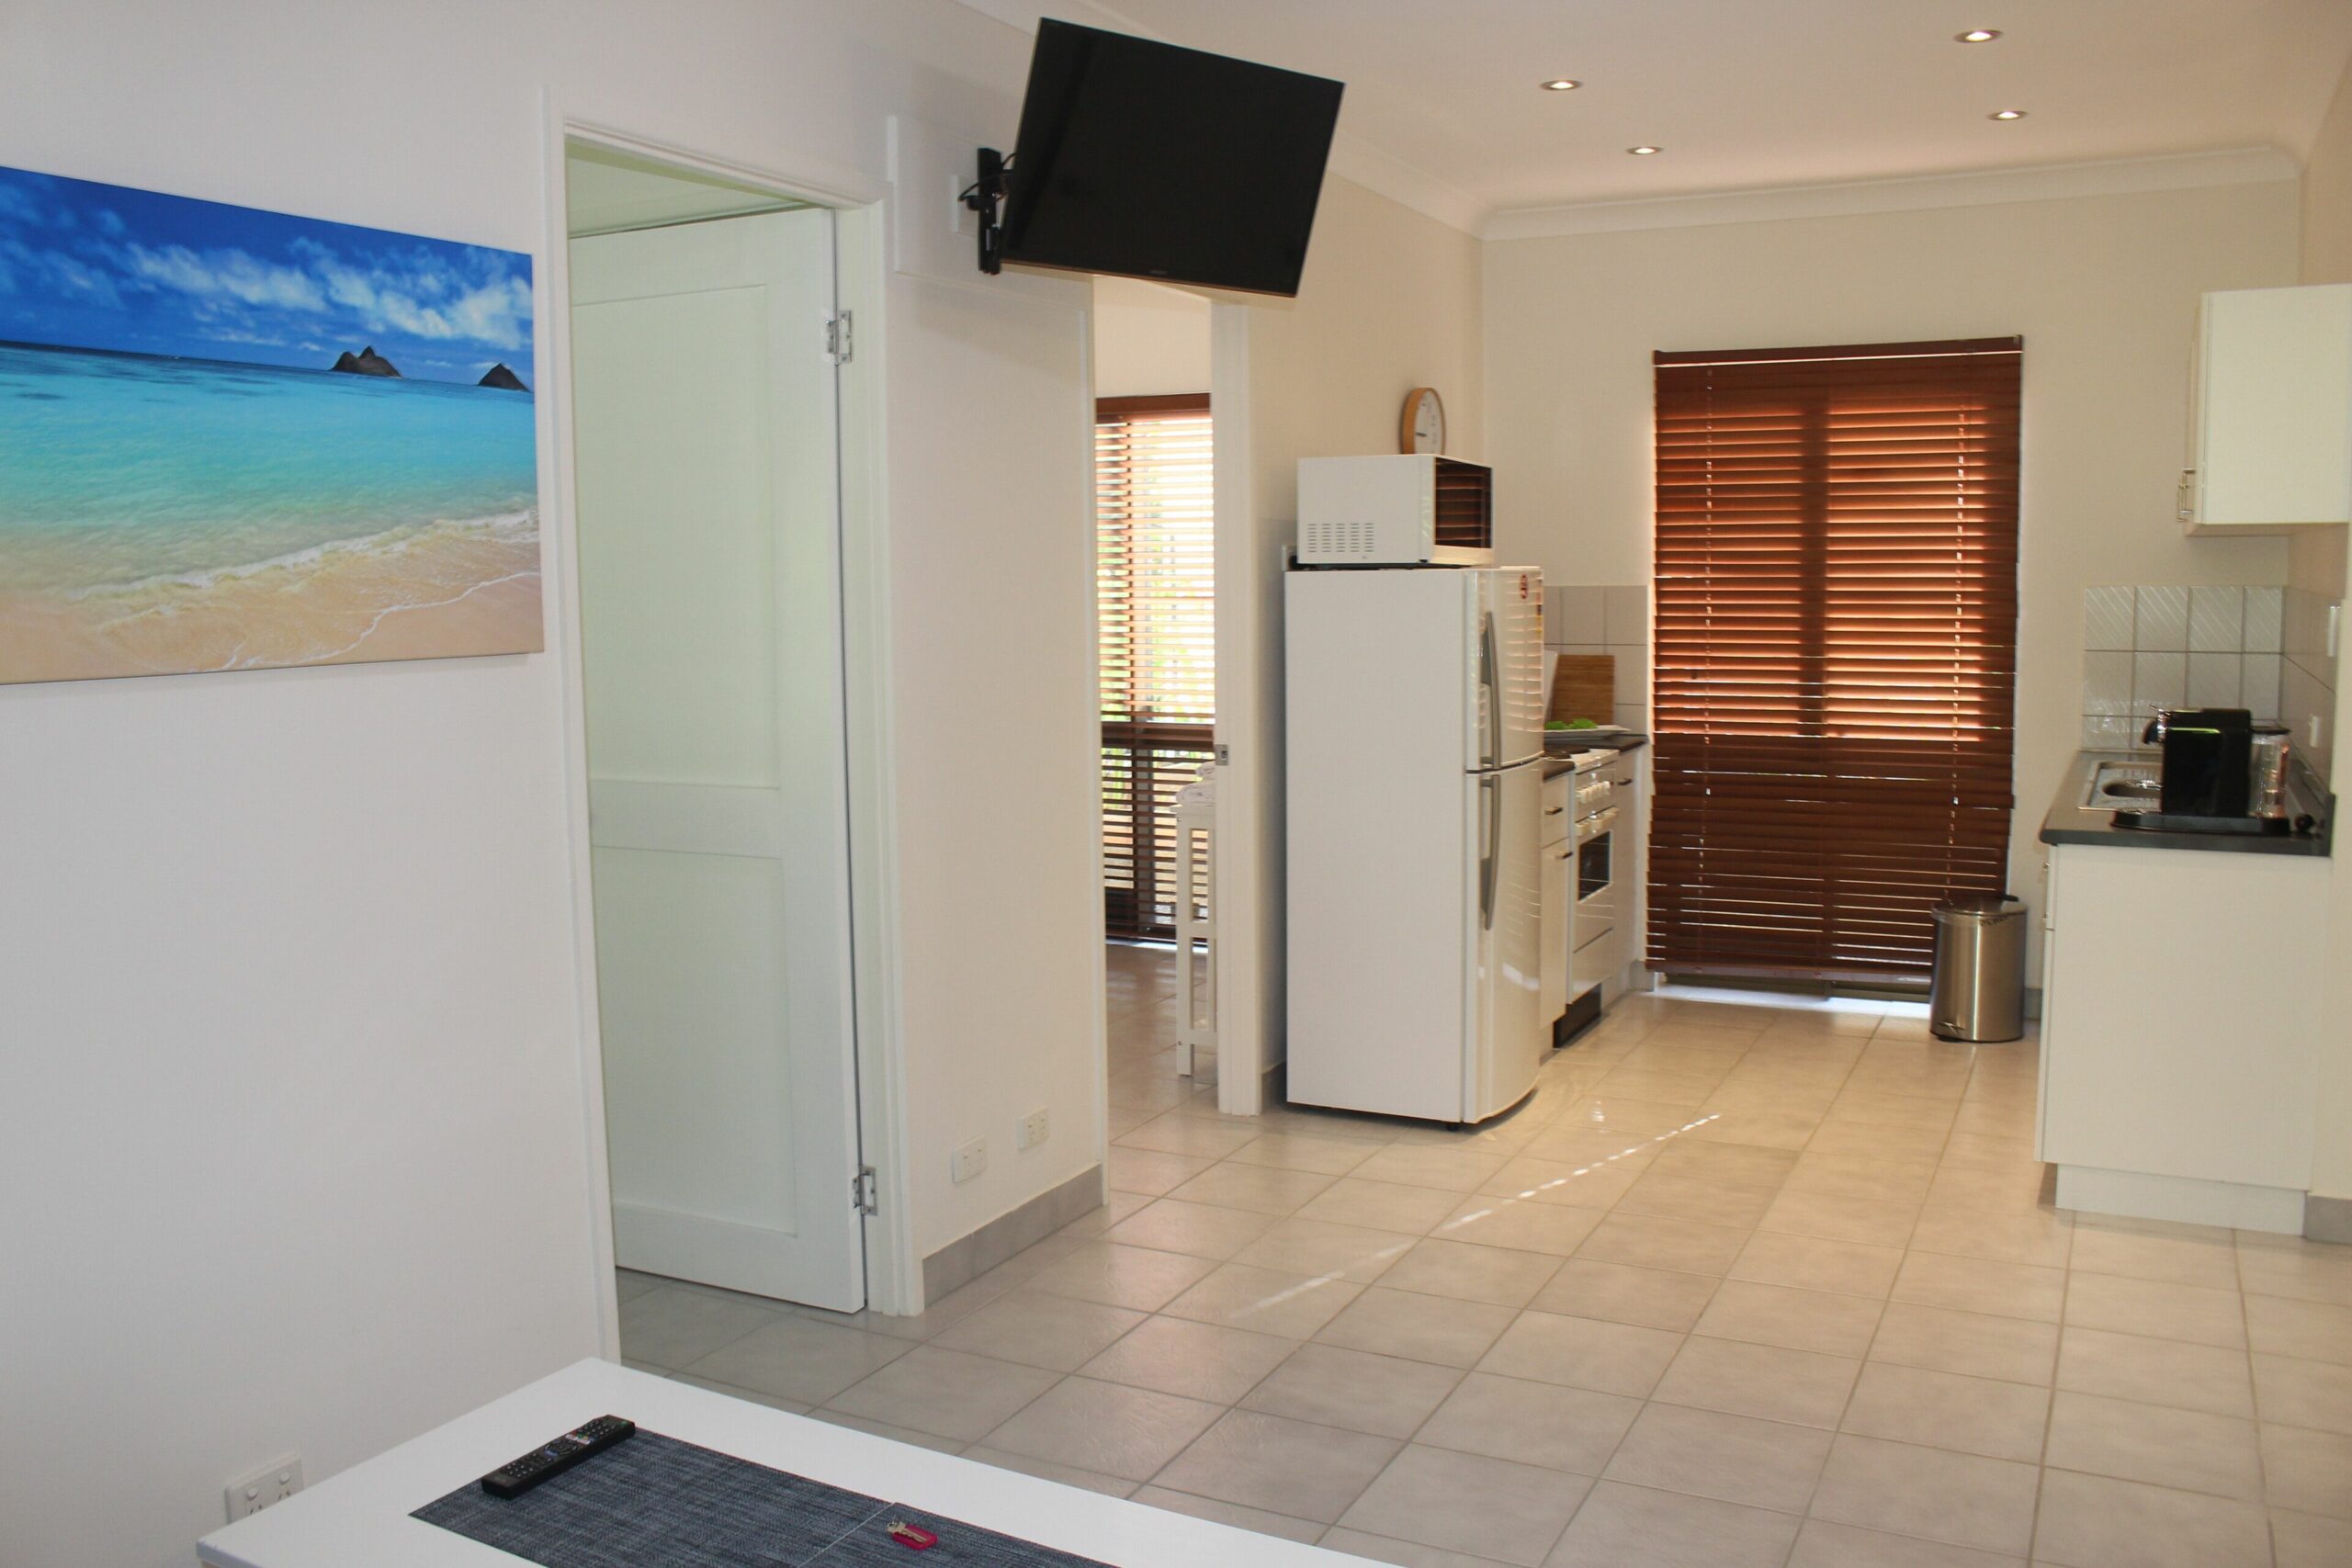 Stunning ,fully self contained ,2 bedroom apartment, just 200 metres from beach.